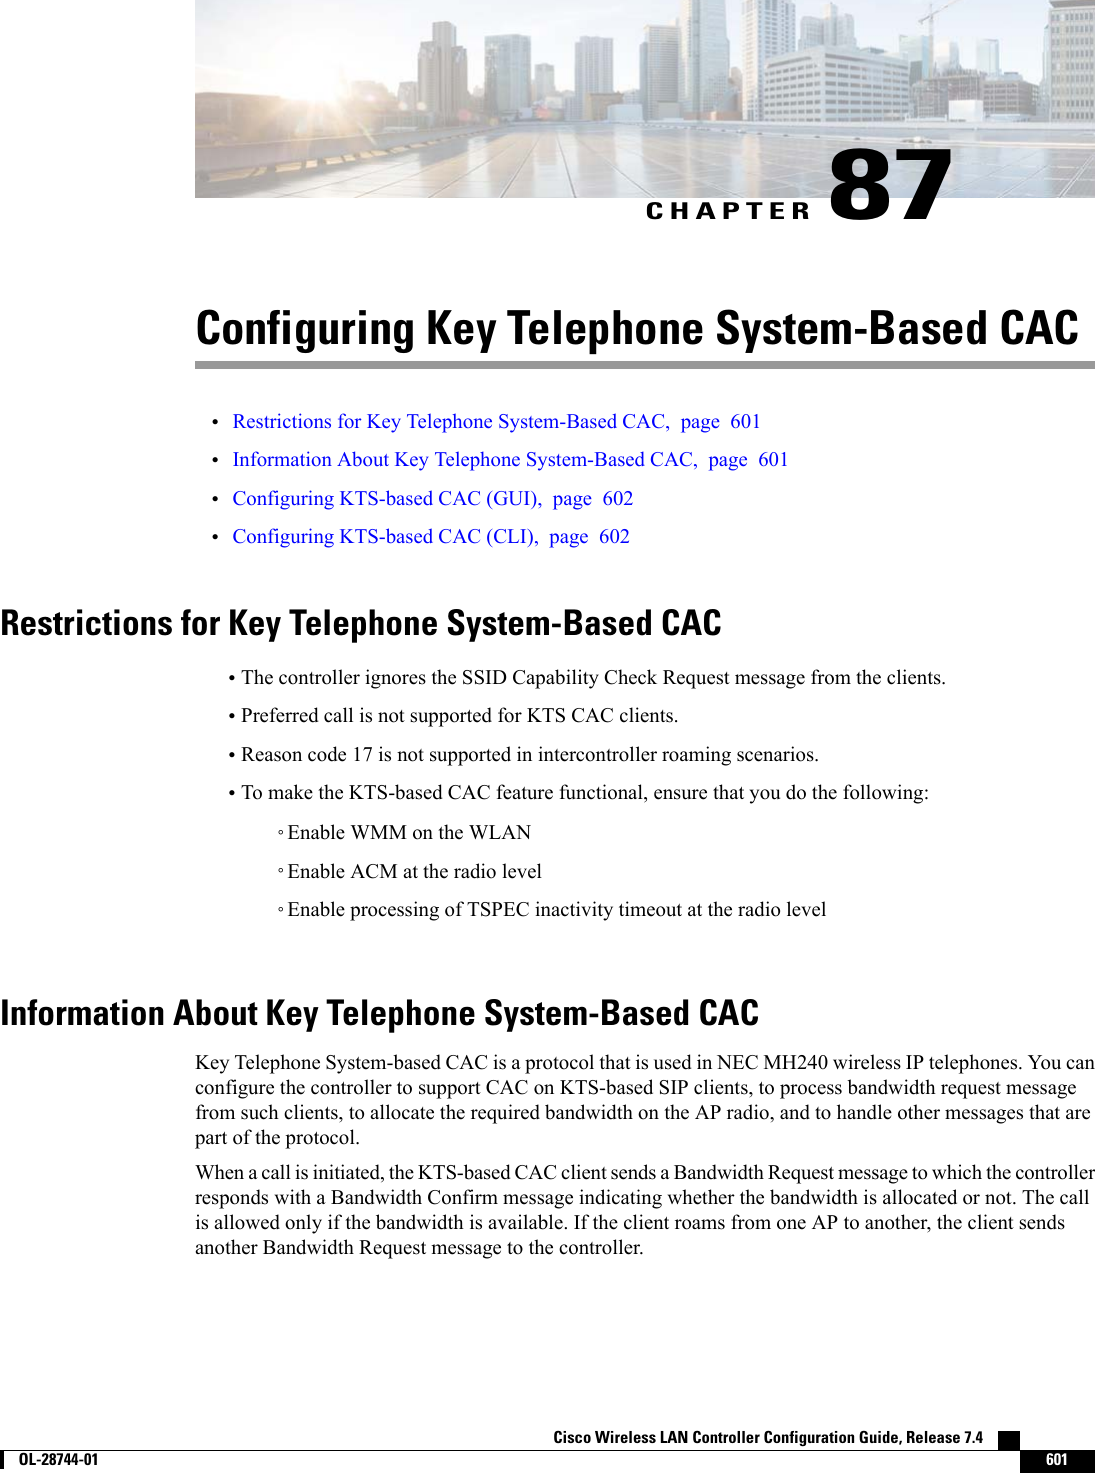 CHAPTER 87Configuring Key Telephone System-Based CAC•Restrictions for Key Telephone System-Based CAC, page 601•Information About Key Telephone System-Based CAC, page 601•Configuring KTS-based CAC (GUI), page 602•Configuring KTS-based CAC (CLI), page 602Restrictions for Key Telephone System-Based CAC•The controller ignores the SSID Capability Check Request message from the clients.•Preferred call is not supported for KTS CAC clients.•Reason code 17 is not supported in intercontroller roaming scenarios.•To make the KTS-based CAC feature functional, ensure that you do the following:◦Enable WMM on the WLAN◦Enable ACM at the radio level◦Enable processing of TSPEC inactivity timeout at the radio levelInformation About Key Telephone System-Based CACKey Telephone System-based CAC is a protocol that is used in NEC MH240 wireless IP telephones. You canconfigure the controller to support CAC on KTS-based SIP clients, to process bandwidth request messagefrom such clients, to allocate the required bandwidth on the AP radio, and to handle other messages that arepart of the protocol.When a call is initiated, the KTS-based CAC client sends a Bandwidth Request message to which the controllerresponds with a Bandwidth Confirm message indicating whether the bandwidth is allocated or not. The callis allowed only if the bandwidth is available. If the client roams from one AP to another, the client sendsanother Bandwidth Request message to the controller.Cisco Wireless LAN Controller Configuration Guide, Release 7.4        OL-28744-01 601